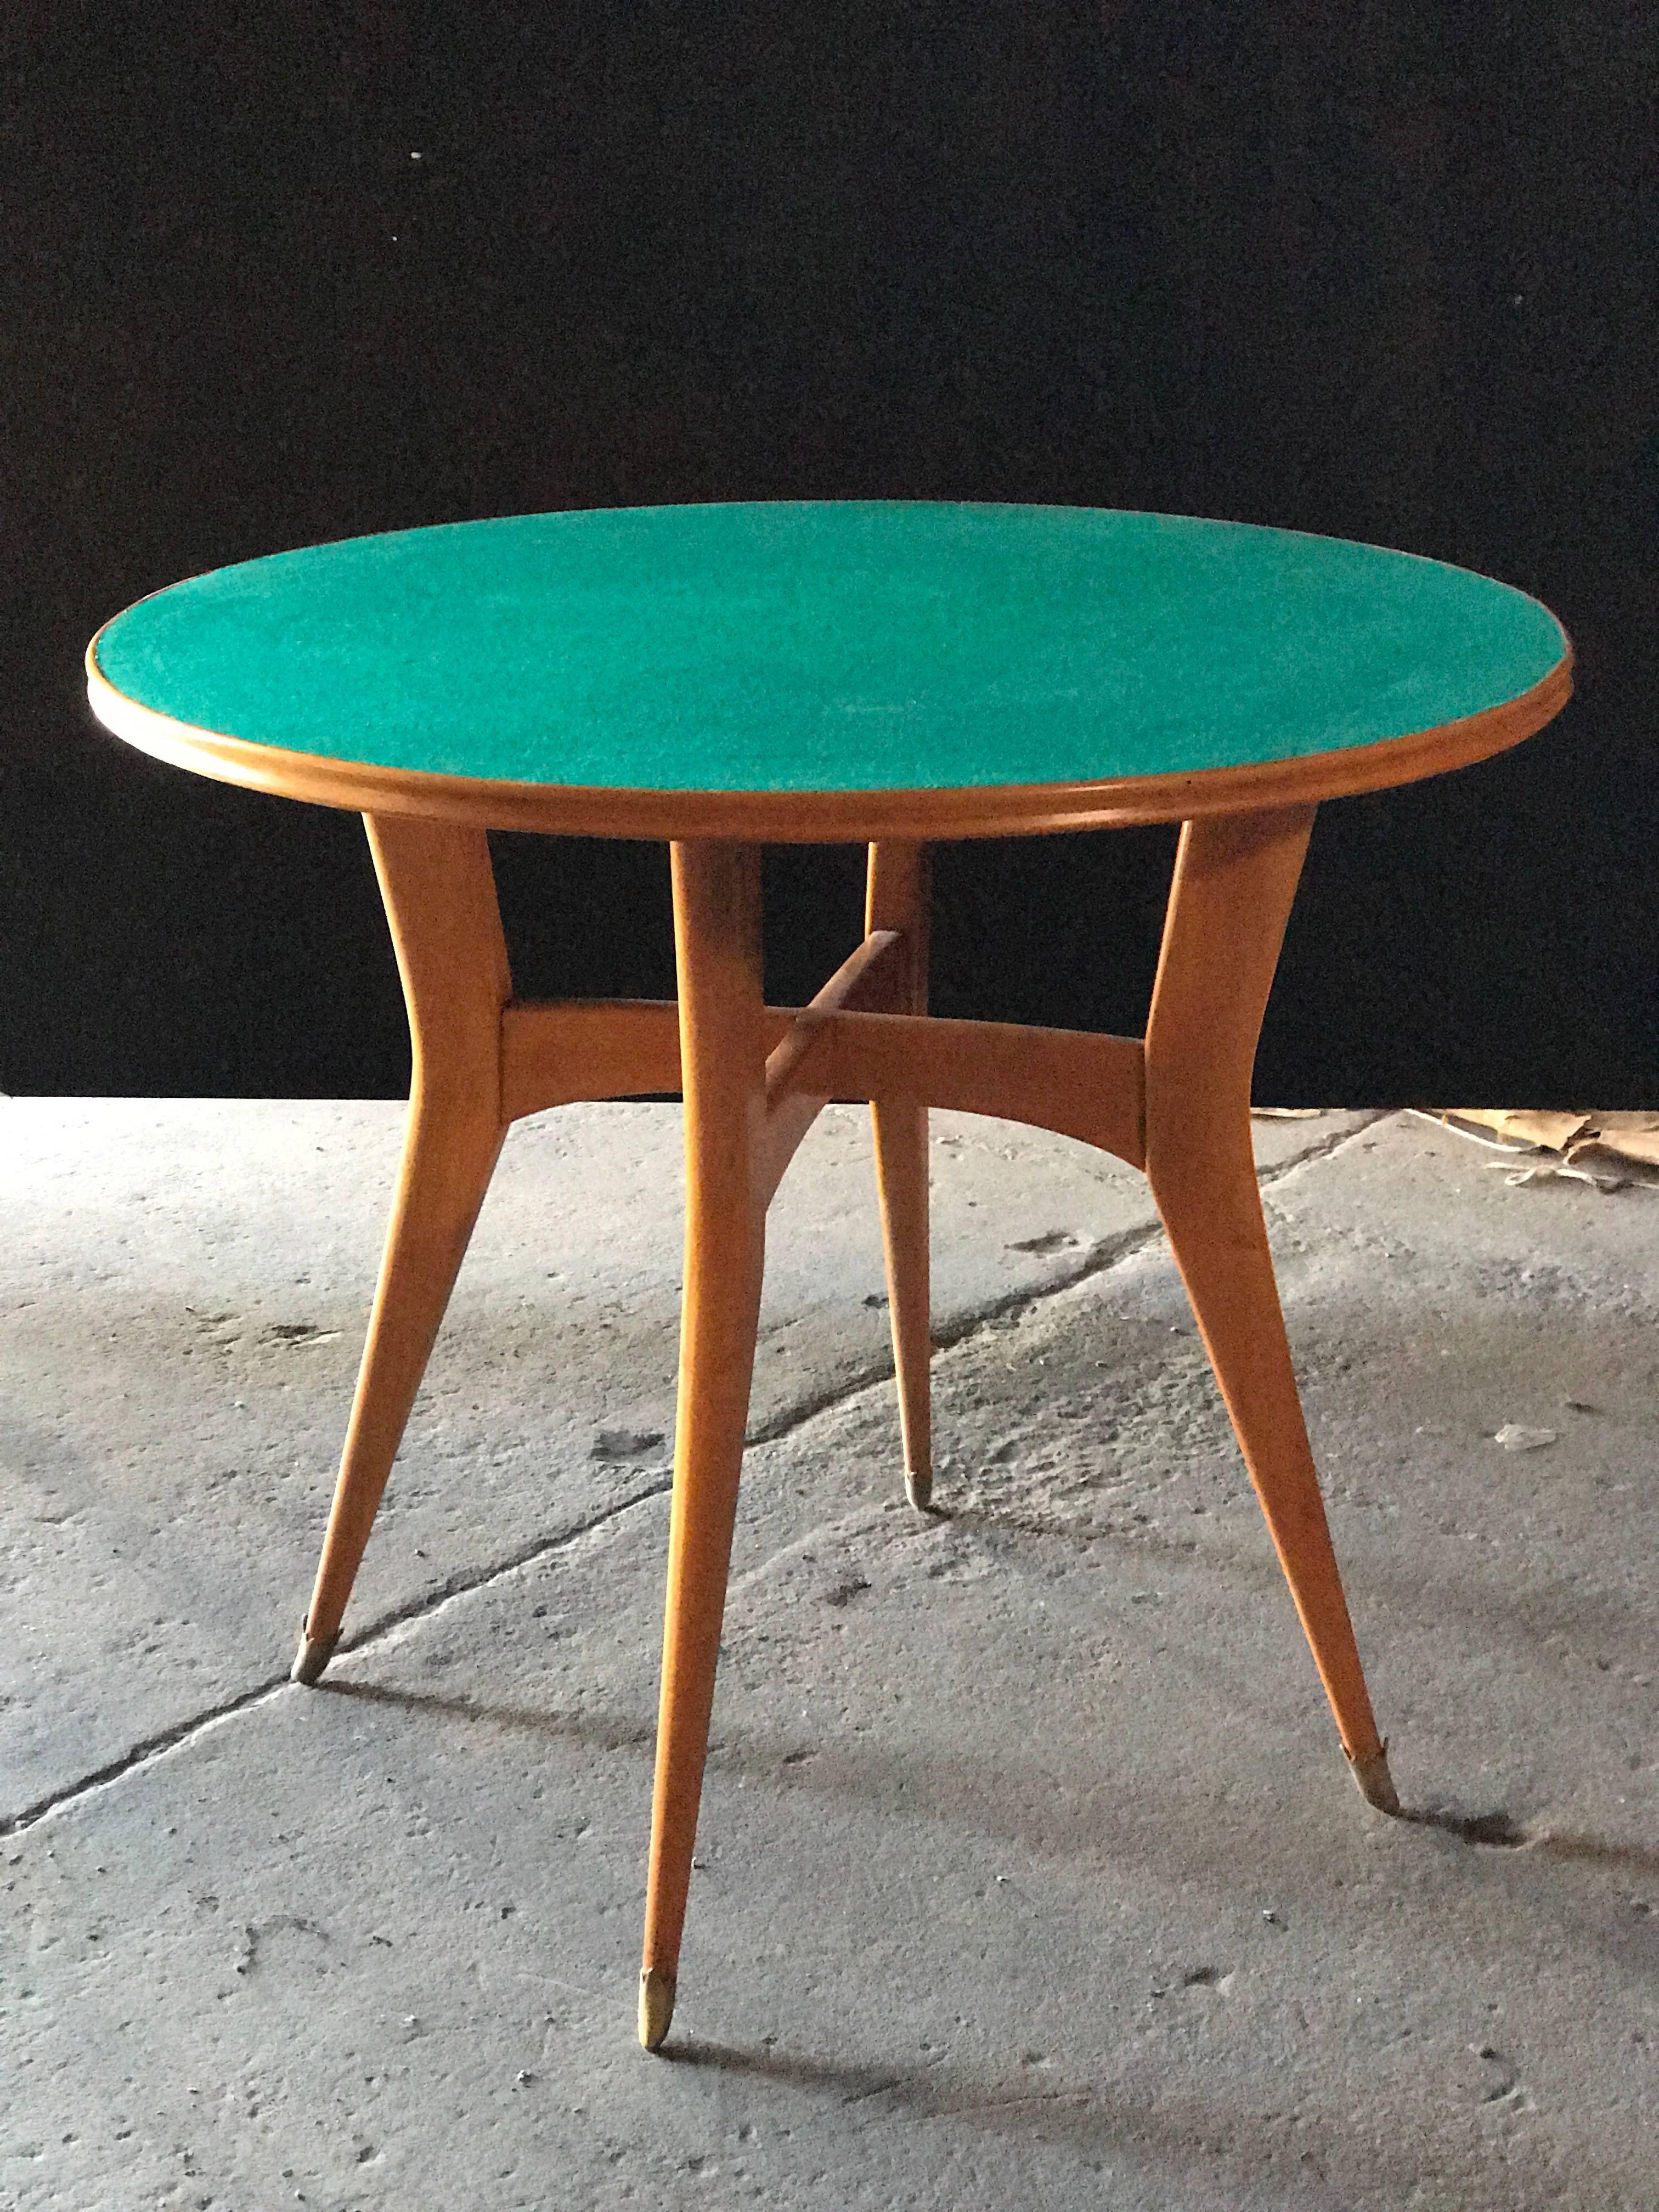 Round game table attributed to Ico Parisi.